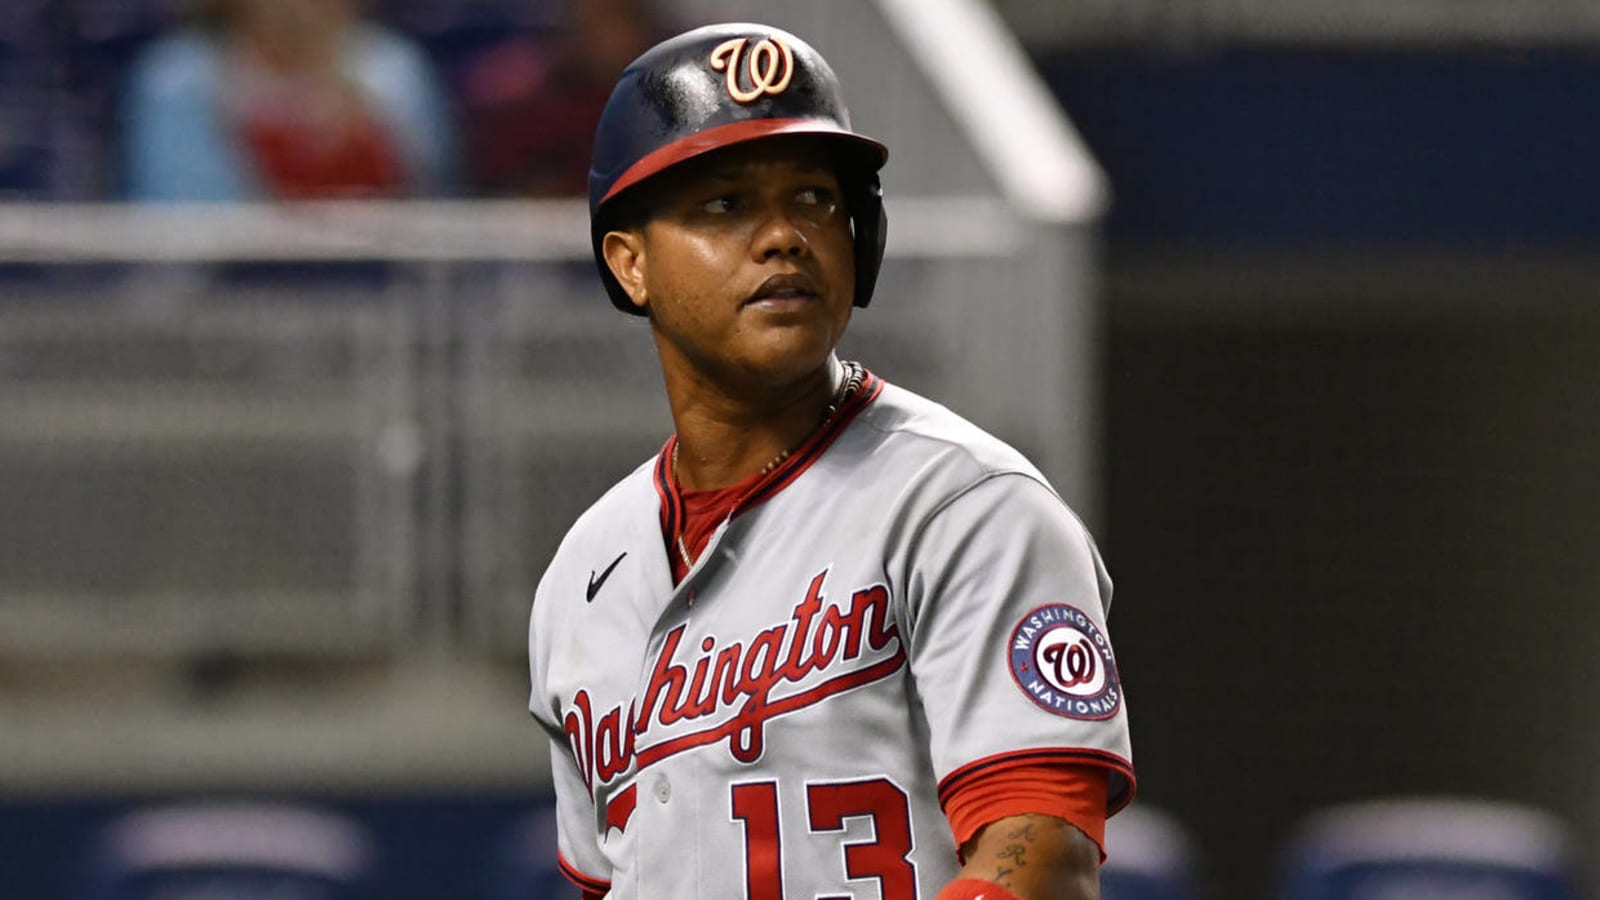 Nats' Castro on administrative leave for alleged domestic violence